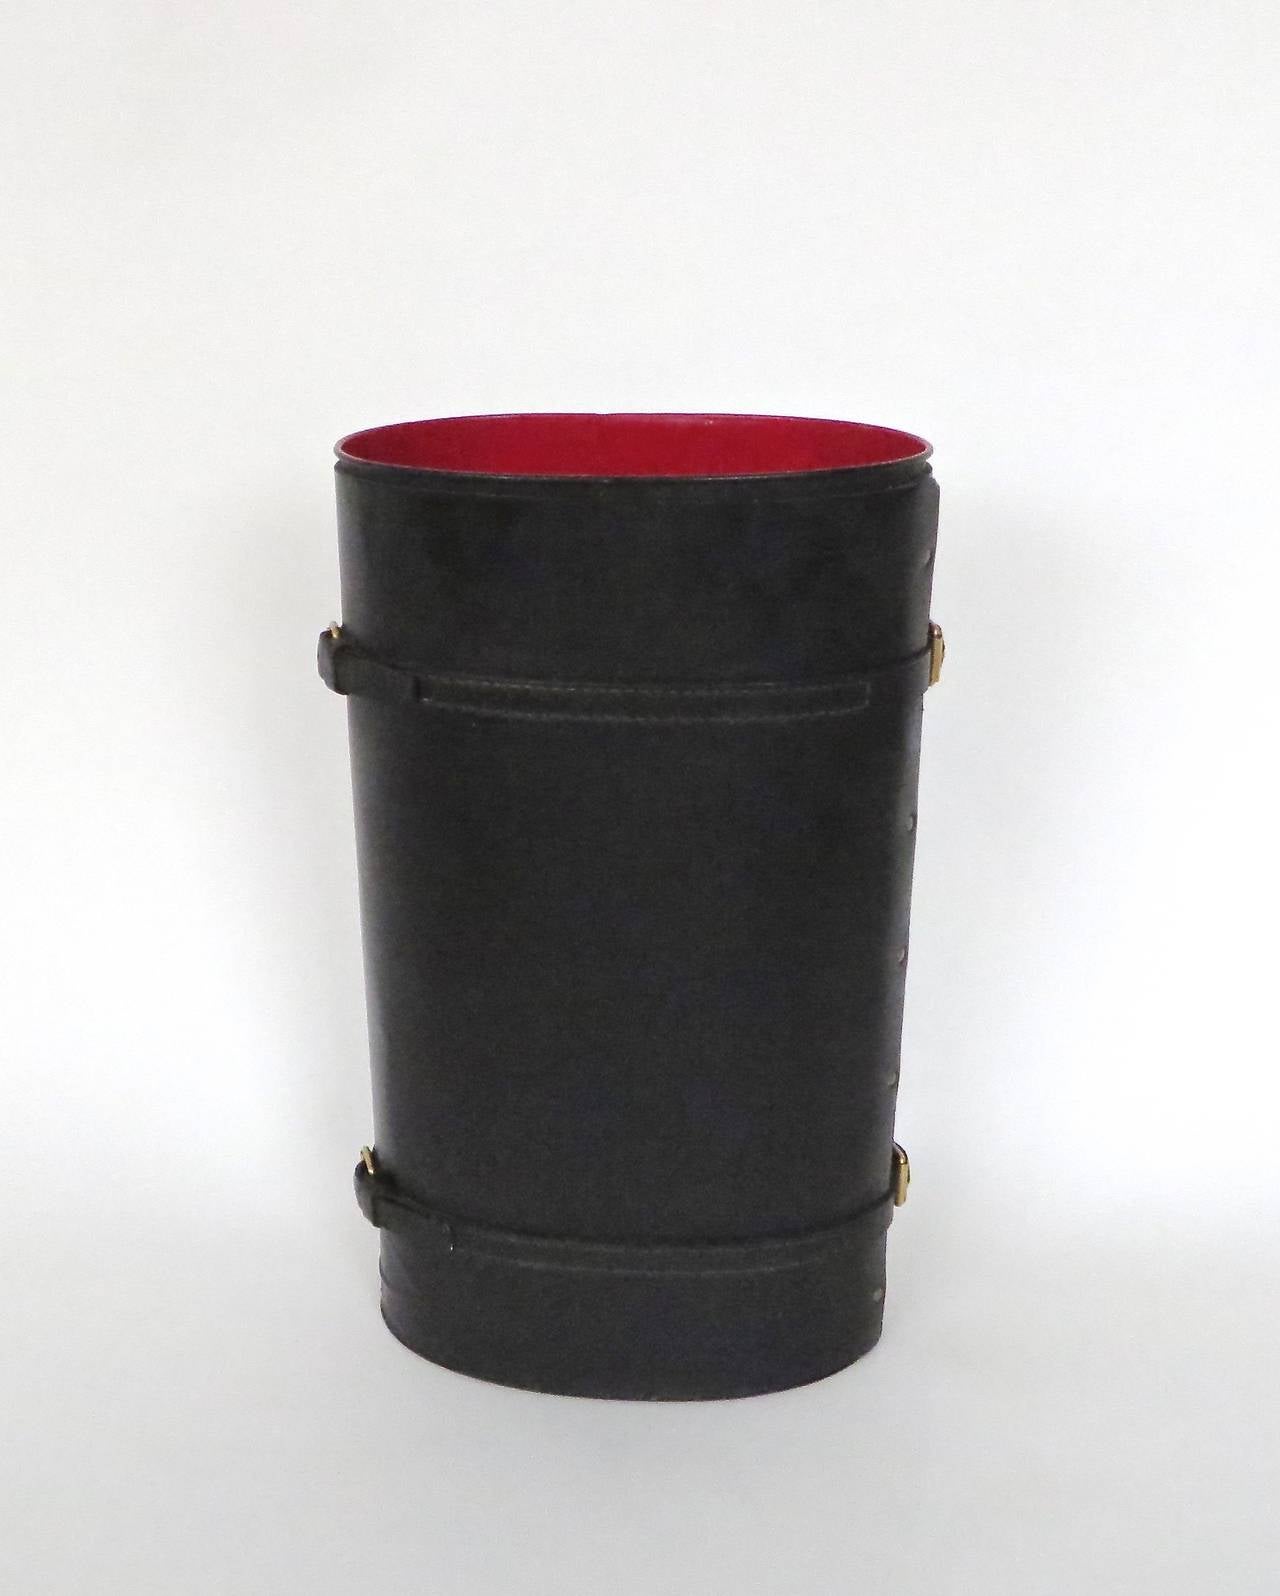 Tall French black leather with red interior oval umbrella stand by Jacques Adnet. Two leather and brass buckles, circa 1950.